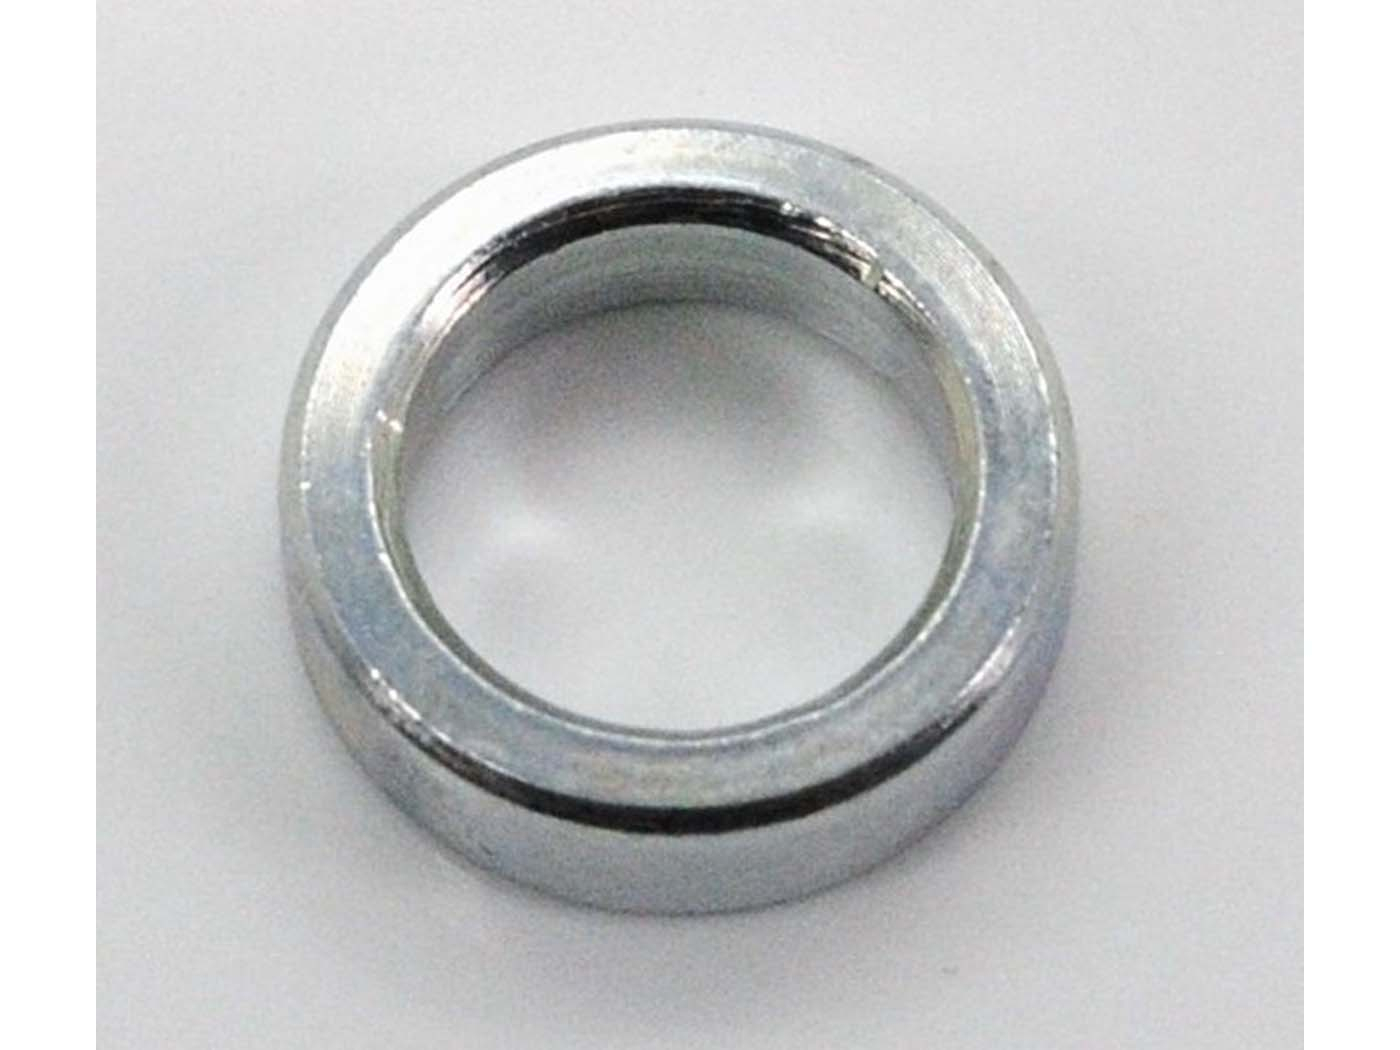 Spacer Bushing Rear Wheel 11 X 5mm For Zündapp Automatic Moped Type 442